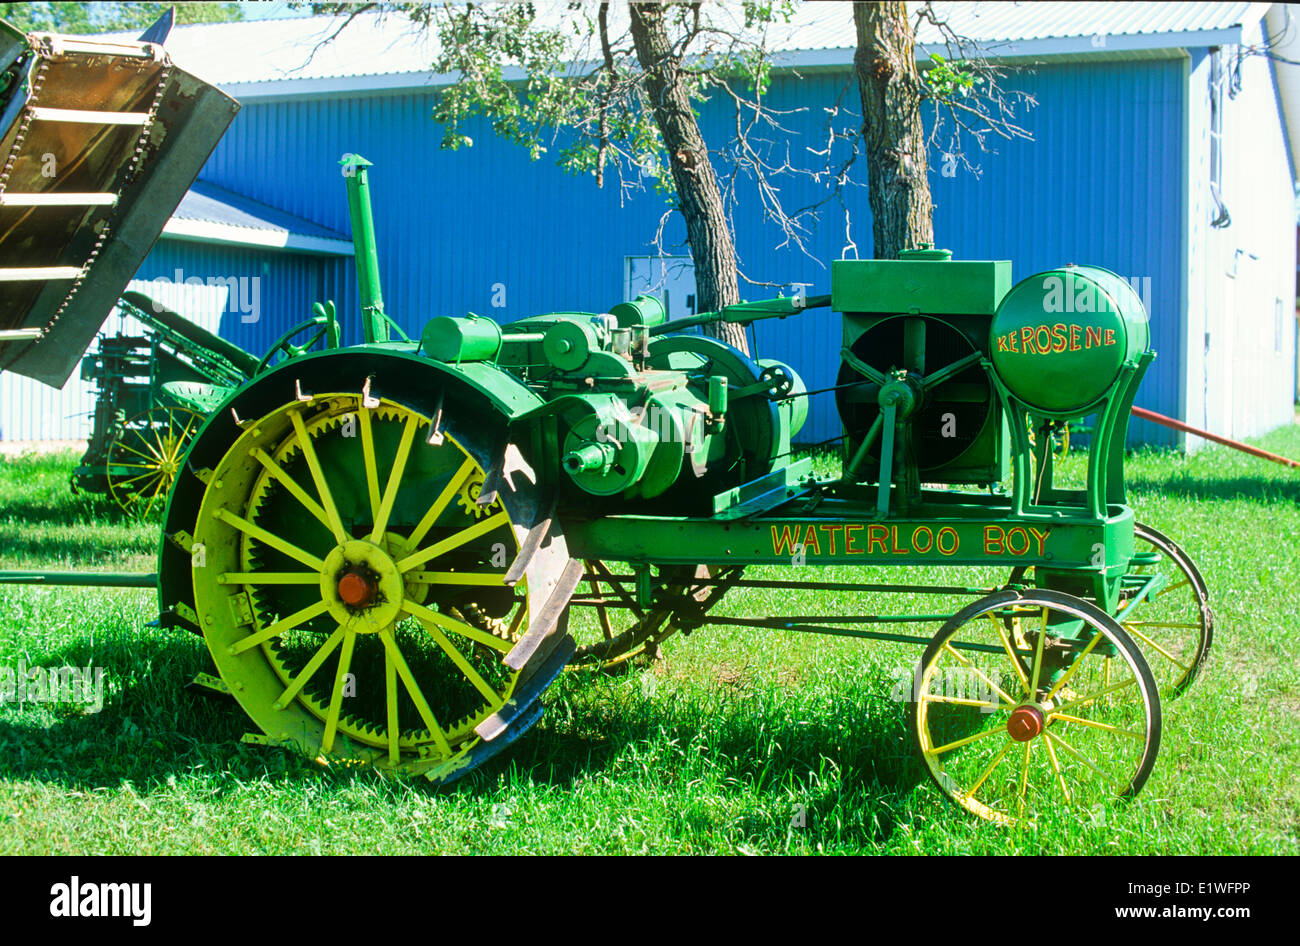 Antique tractor, Homesteader's Village and Agricultural Museum, Manitoba, Canada Stock Photo